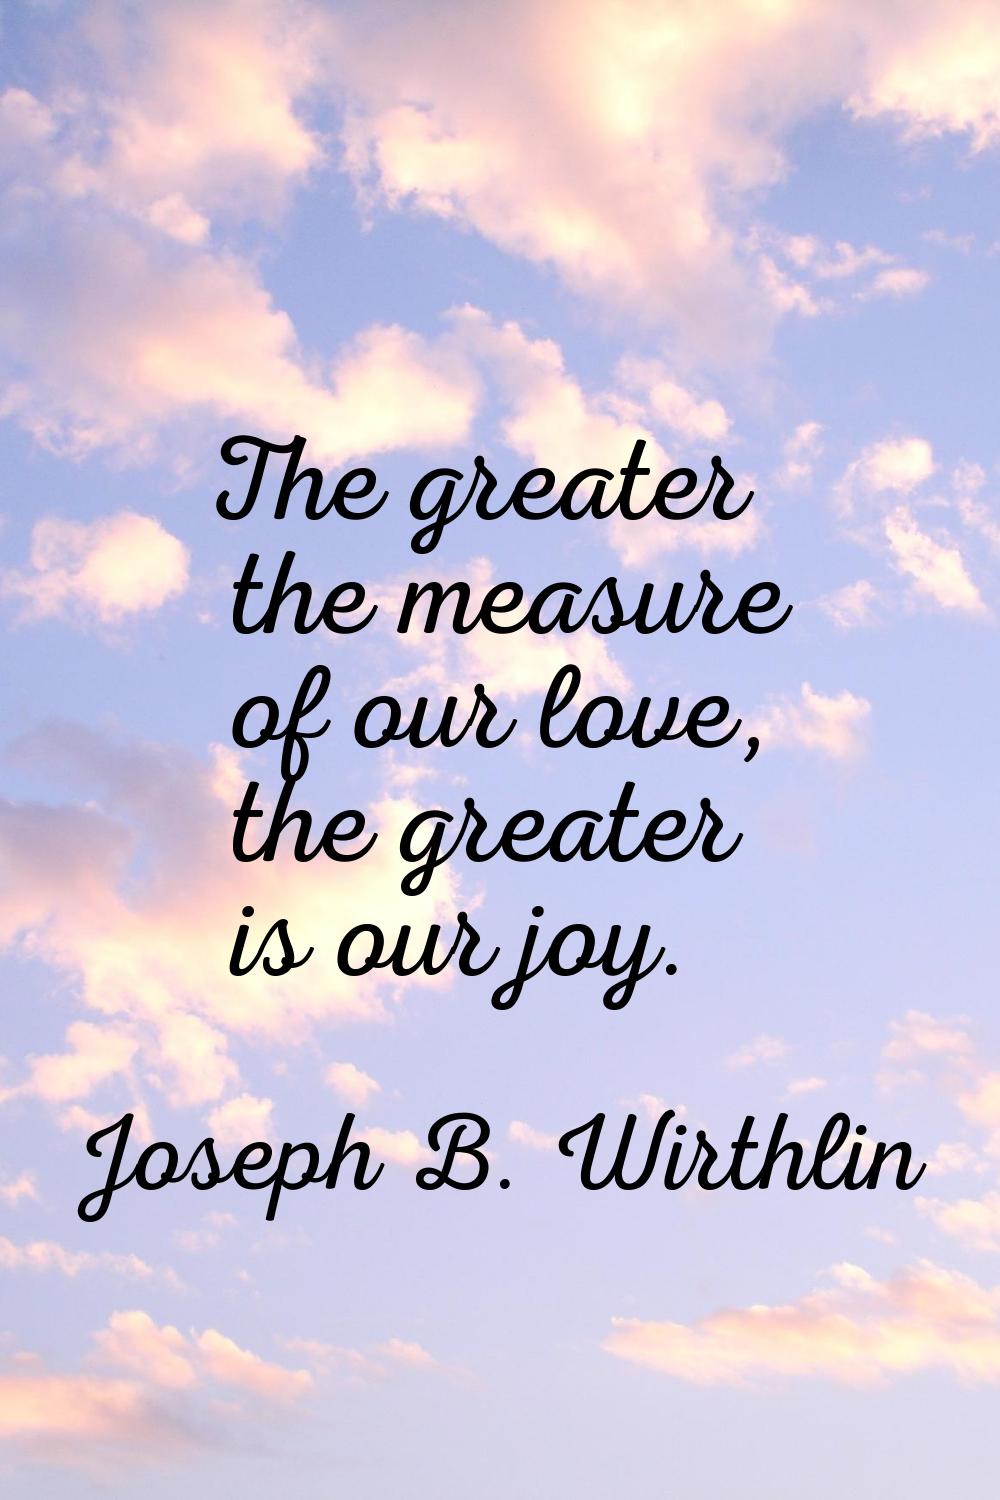 The greater the measure of our love, the greater is our joy.